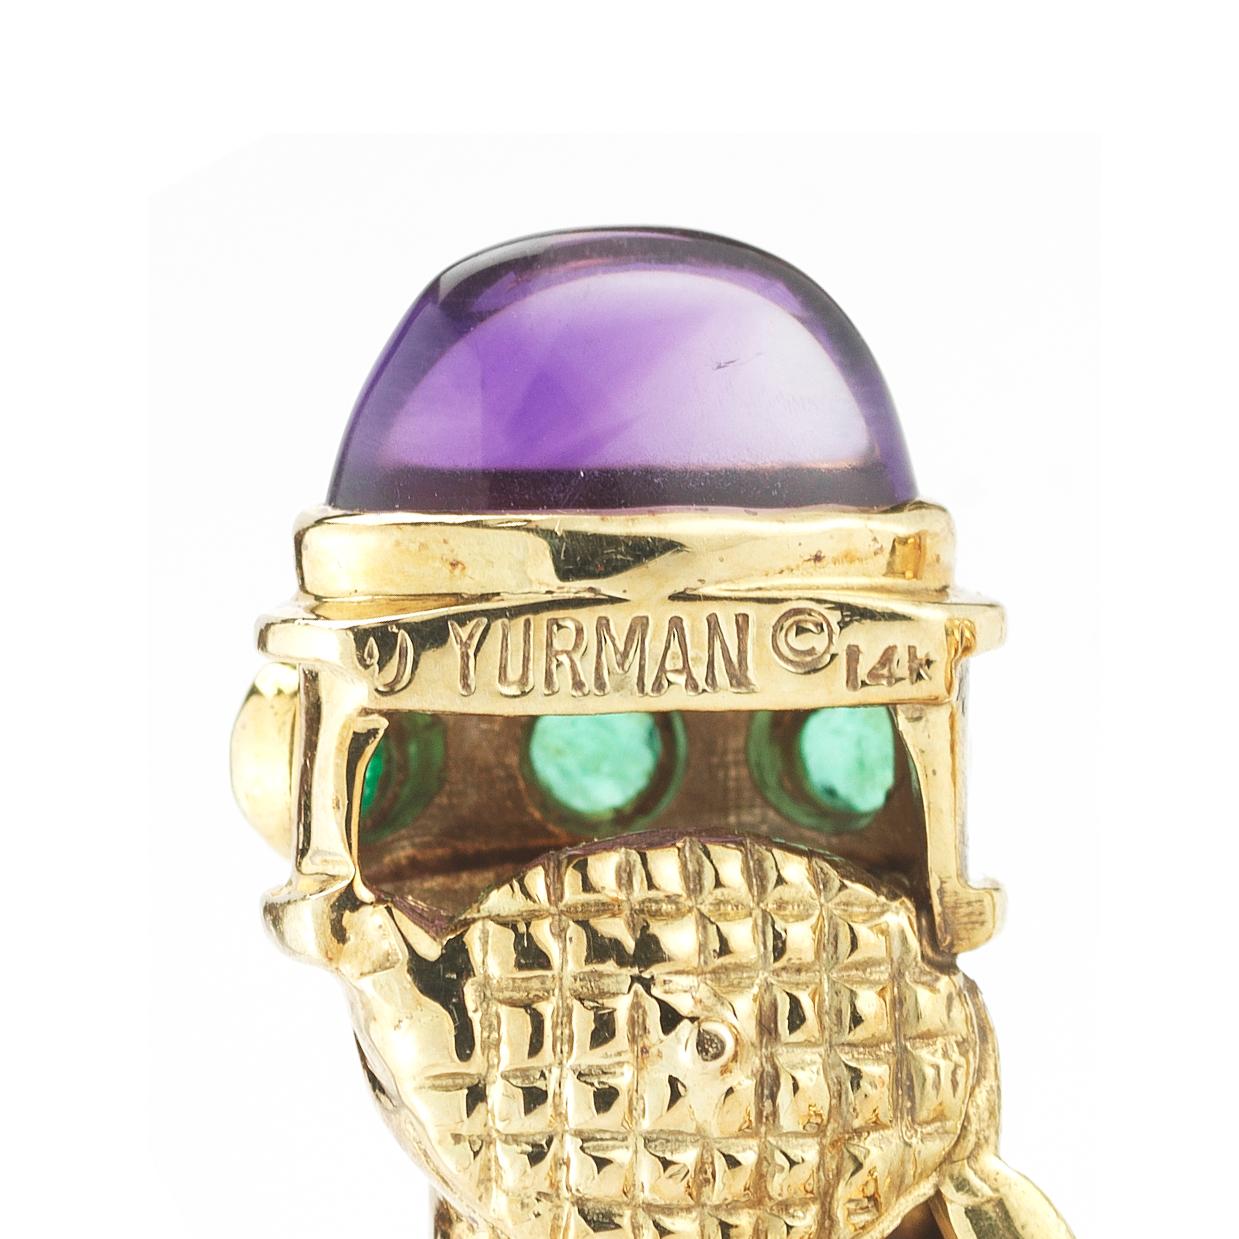 A cornucopia hoop design formed in 14 karat yellow gold features amethyst cabochons totaling approximately 4 carats accented with cabochon emeralds totaling approximately 0.50 carats. Signed Yurman.